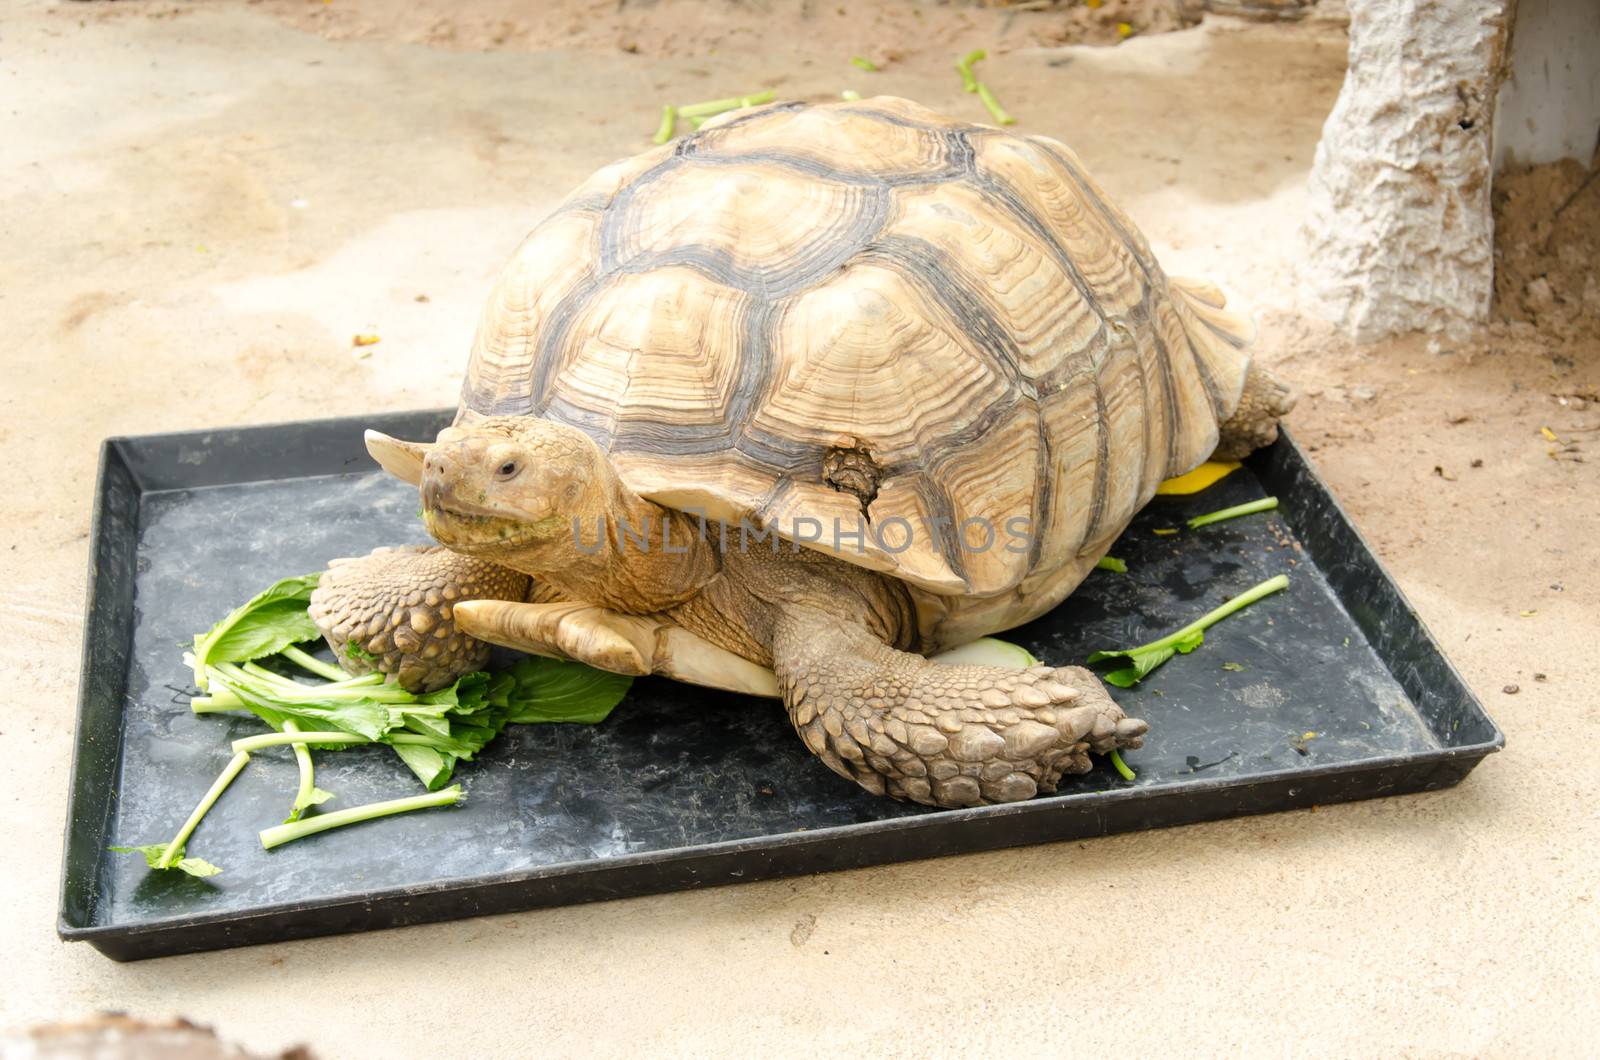 A large the golden turtle eating a vegetables.